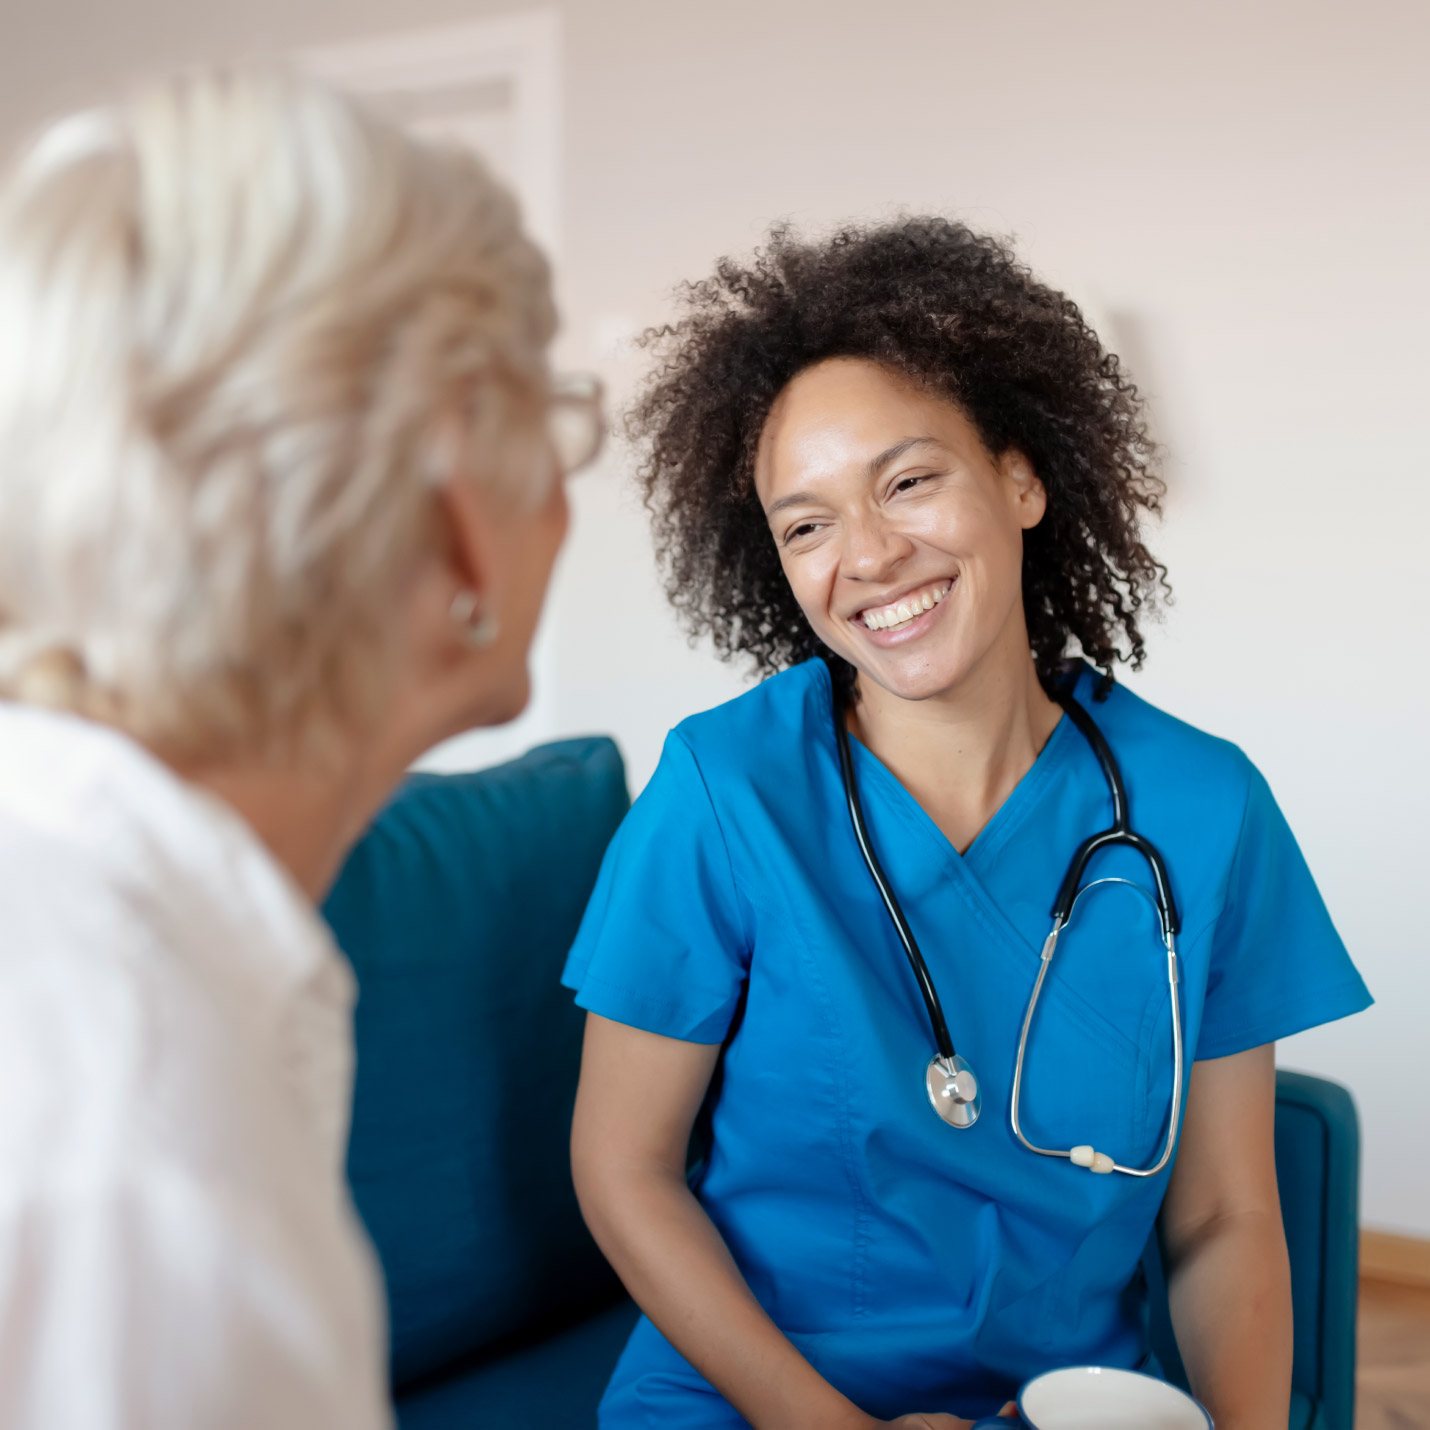 focus on in-home care nurse speaking with an elderly woman over the shoulder of the elderly woman out of focus